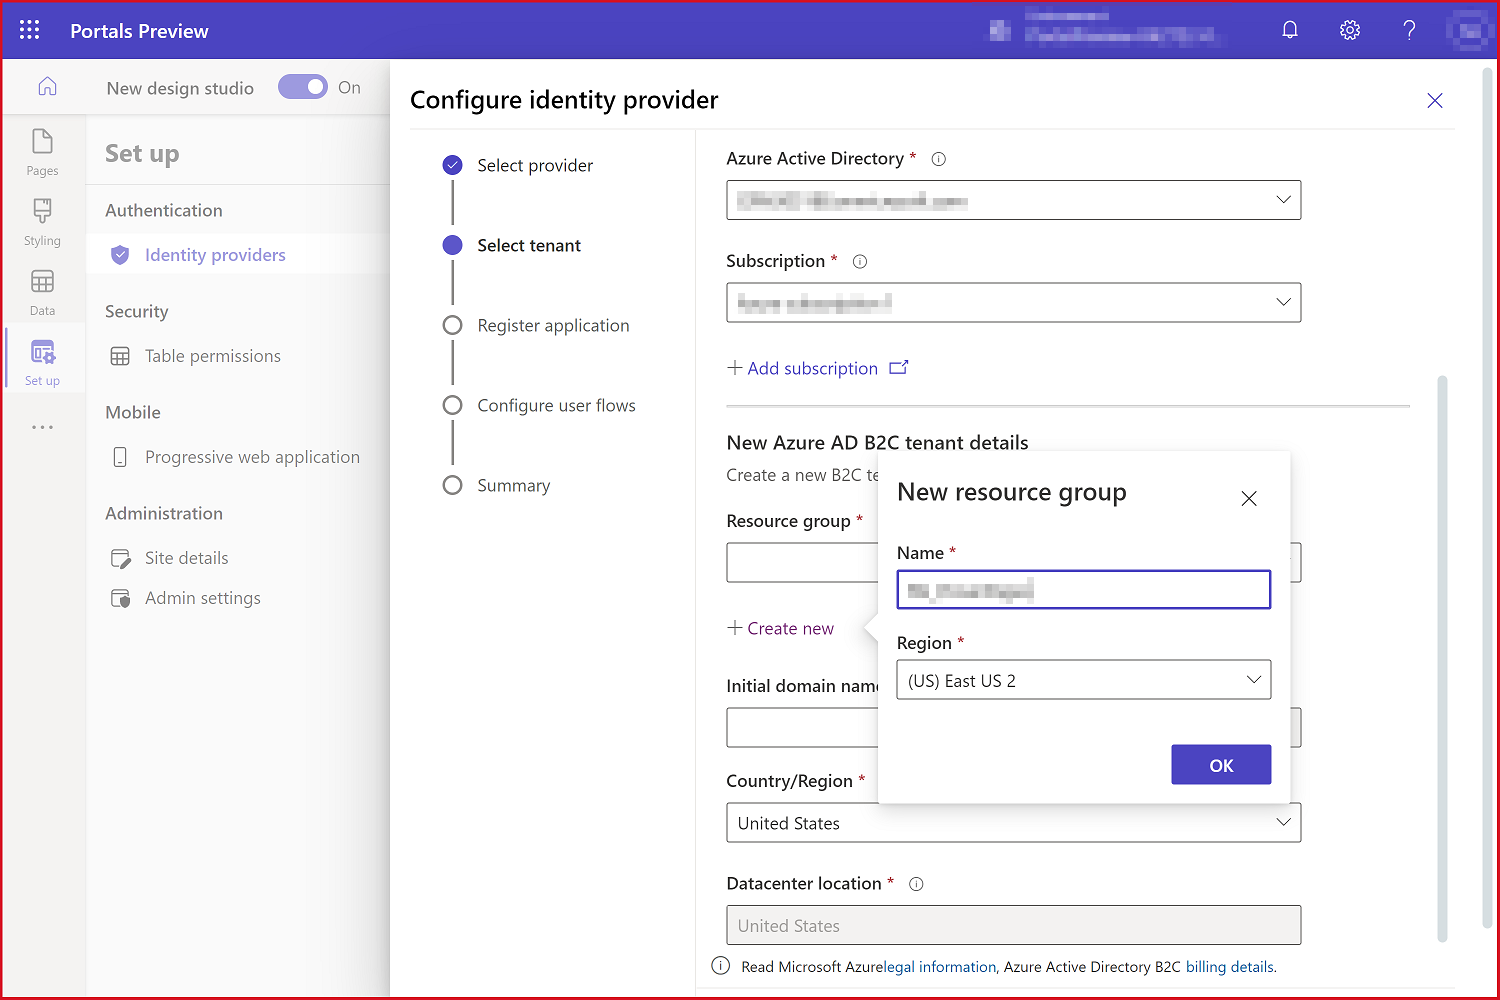 Enter details to configure identity provider.